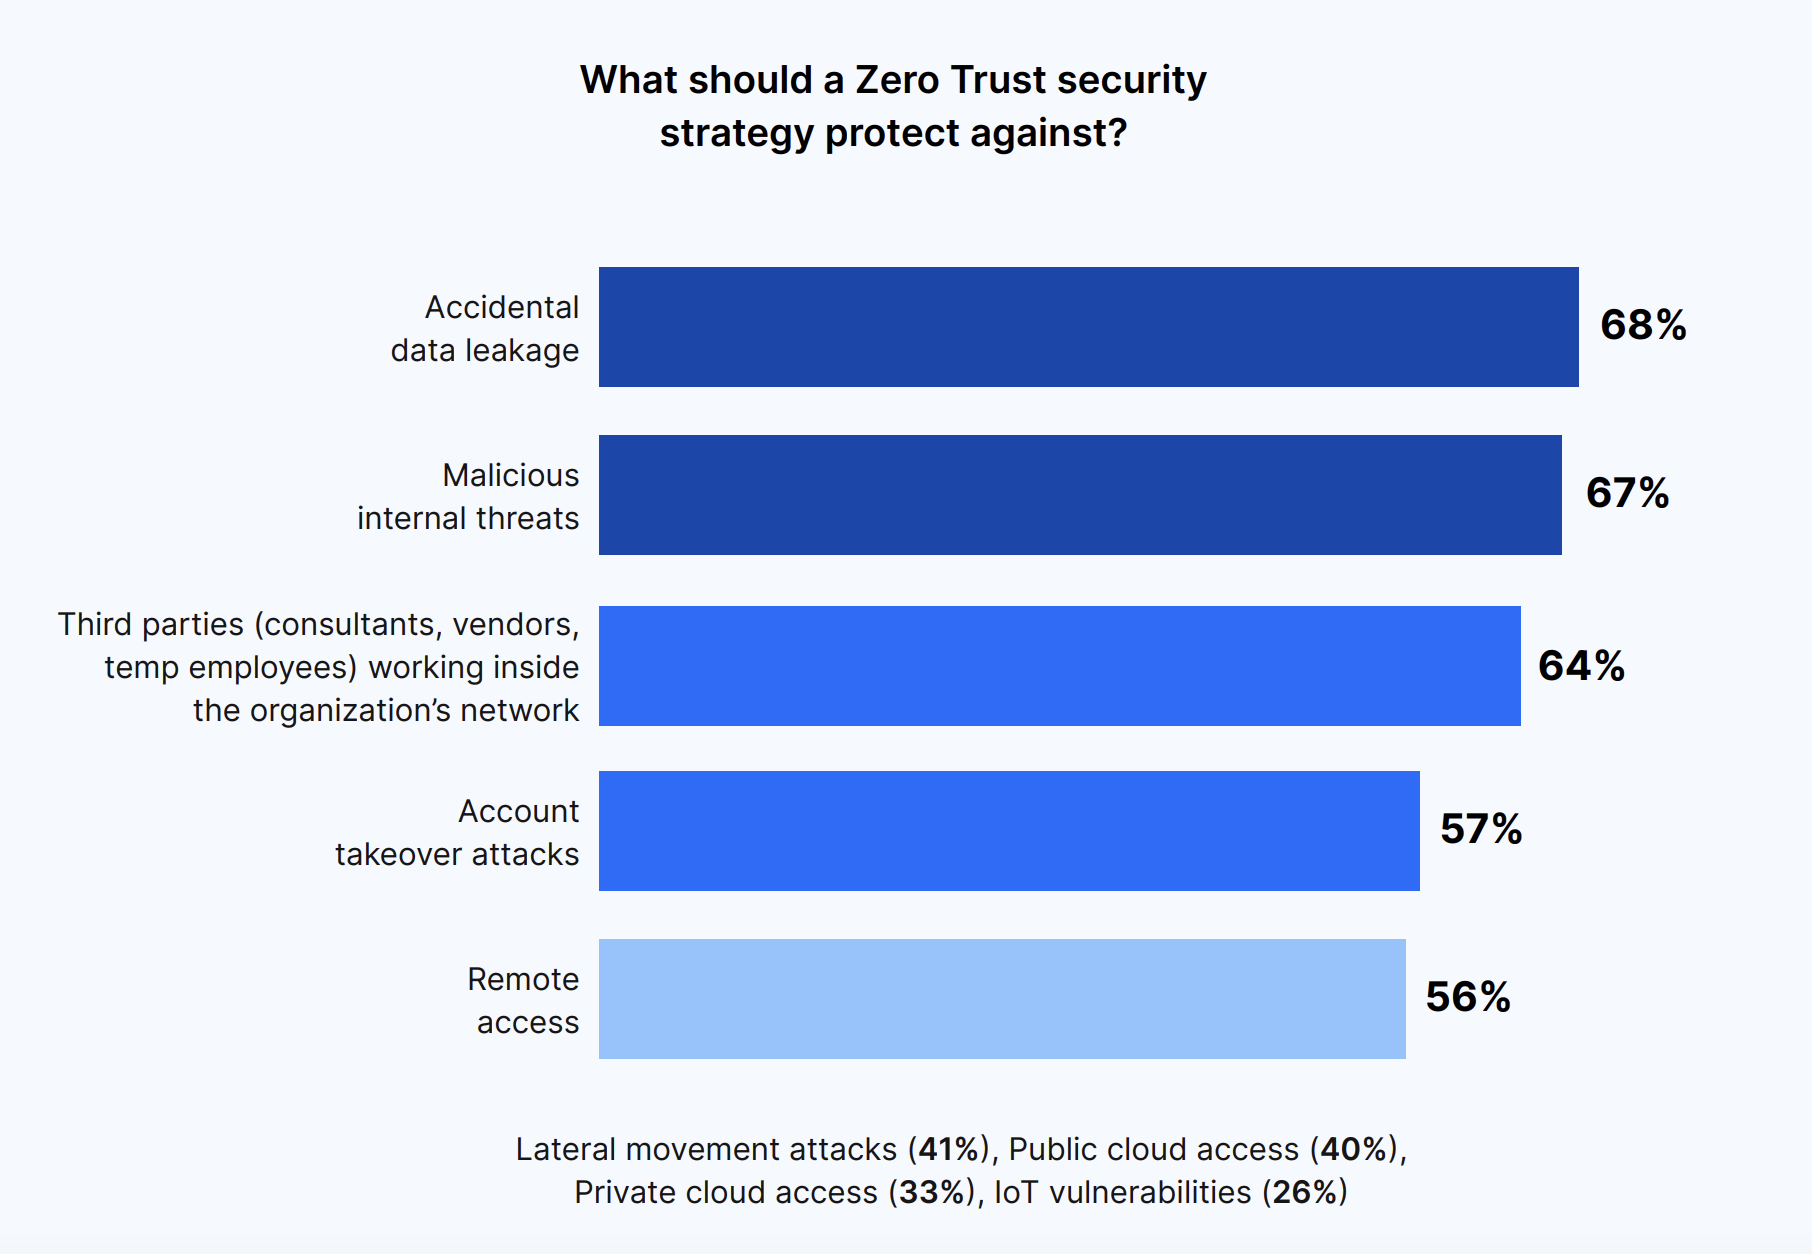 What should a Zero Trust security strategy protect against?